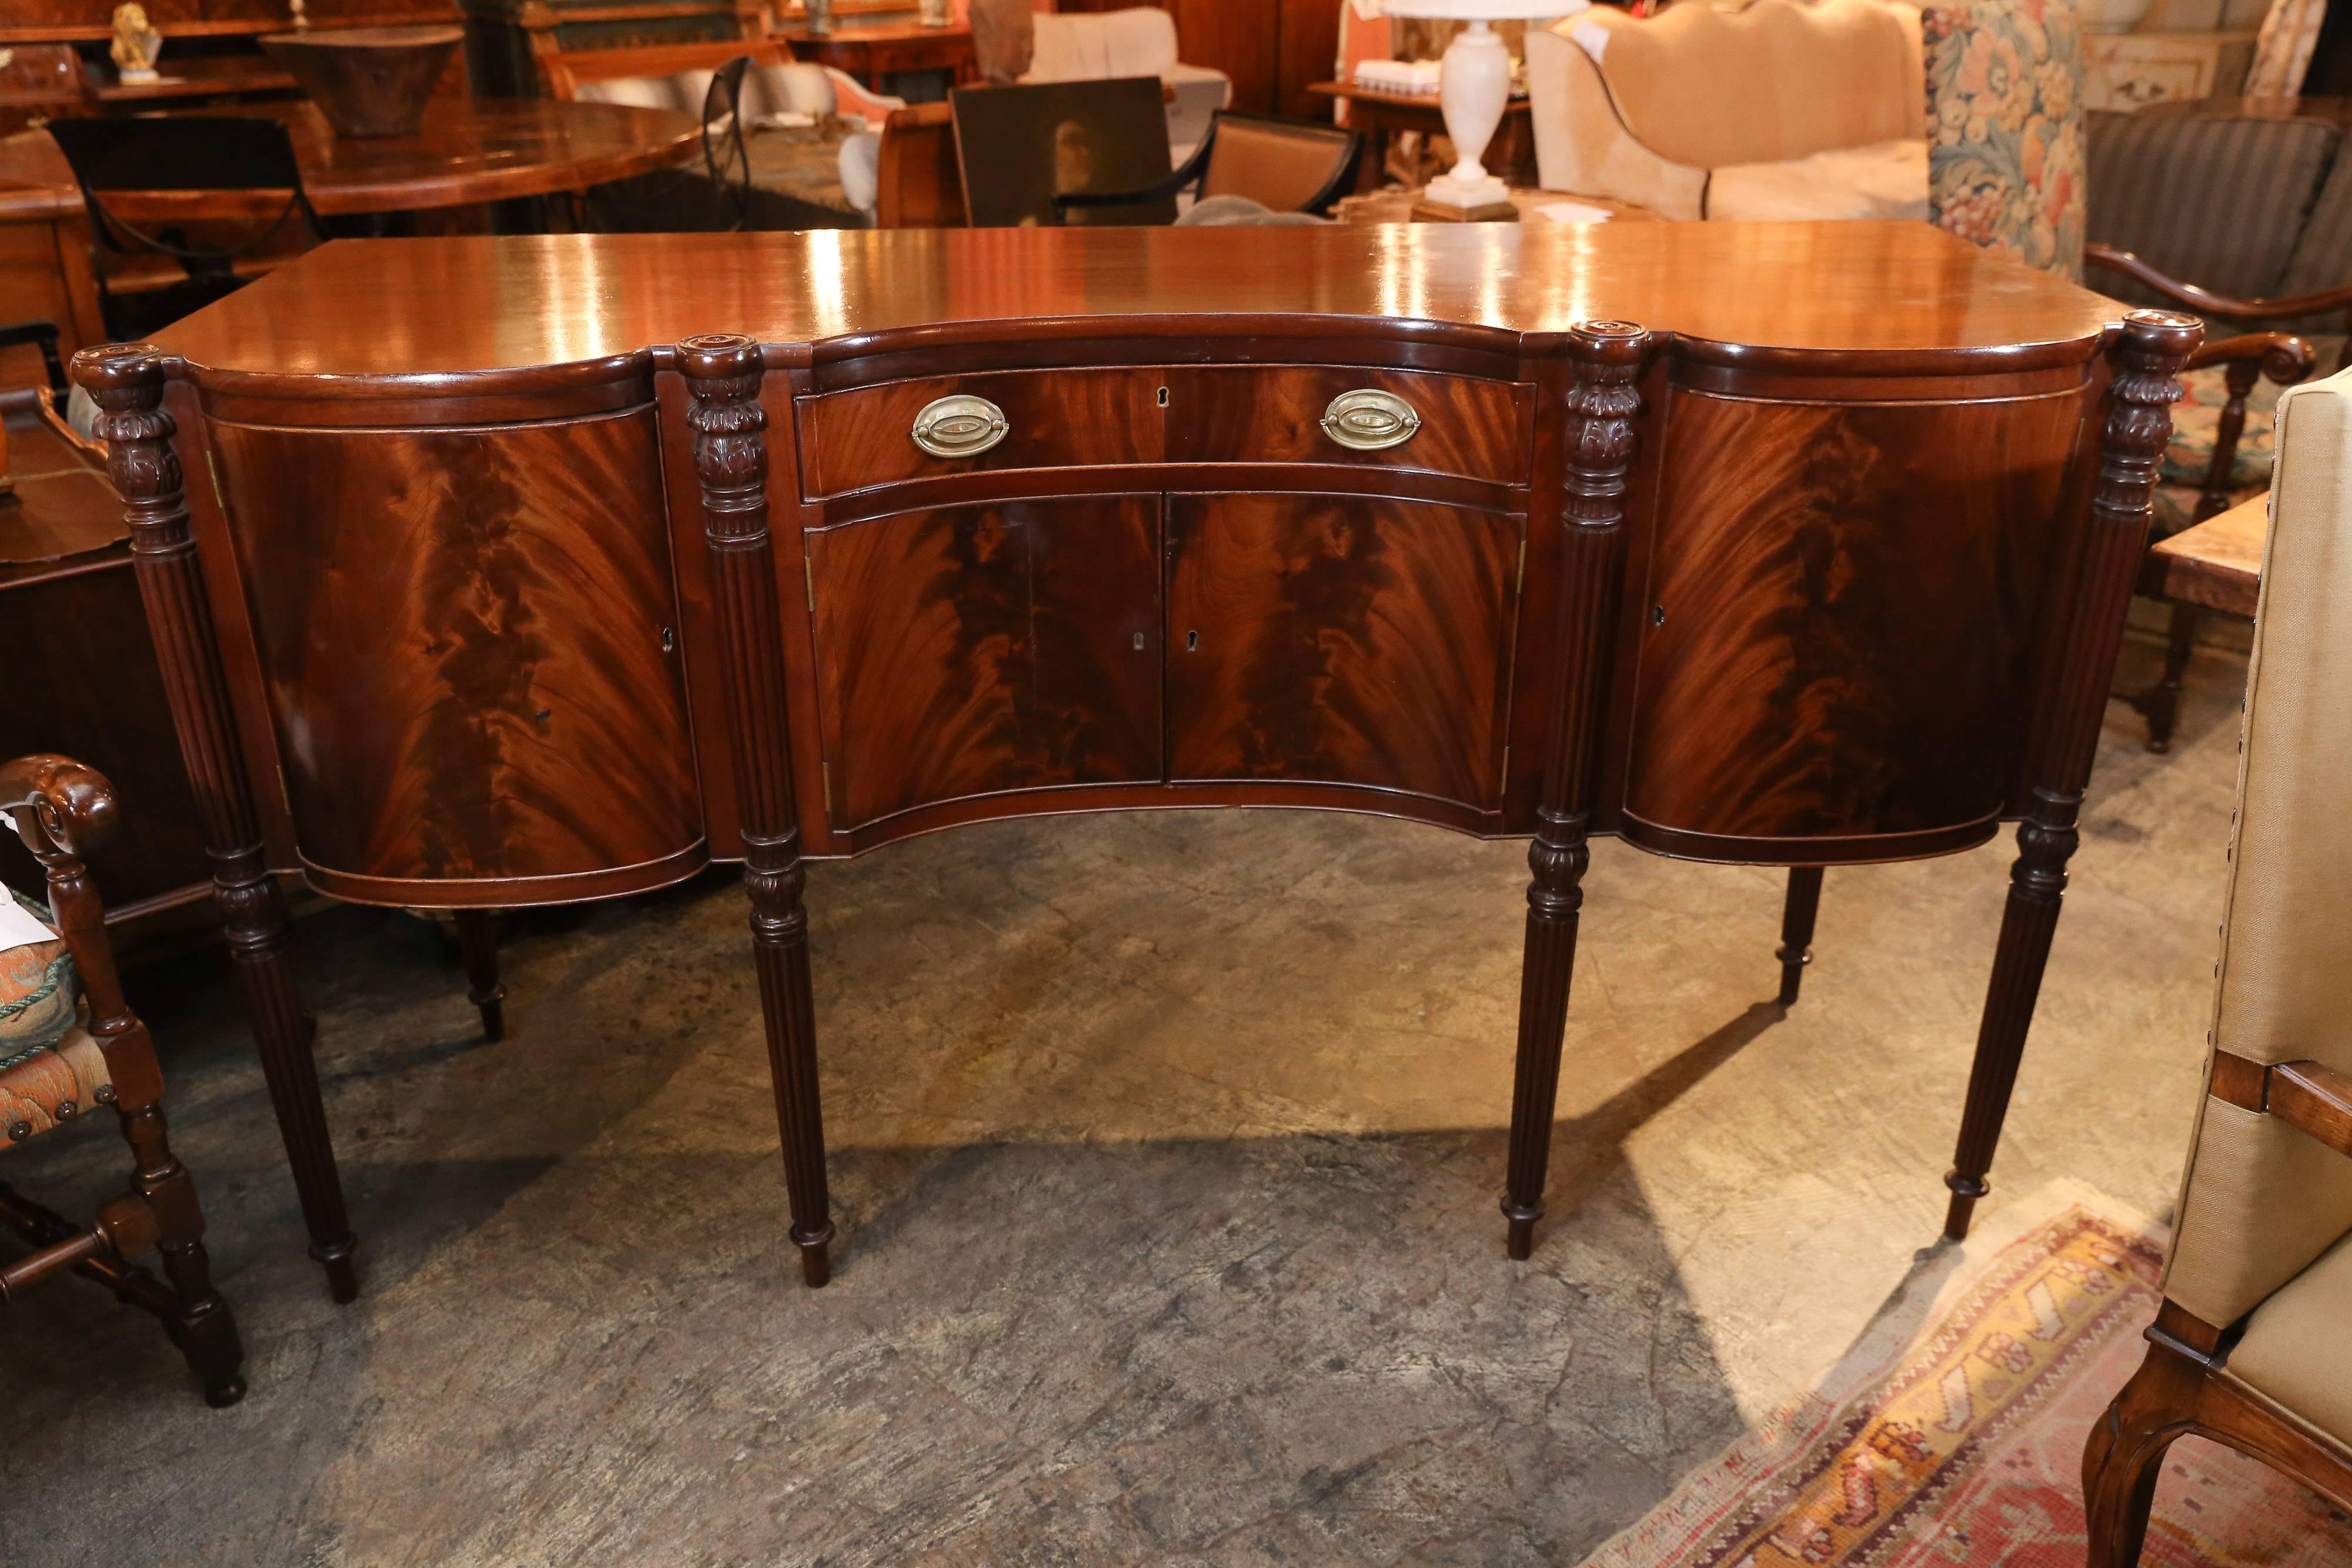 Tall 19th century English flame mahogany sideboard with centre silver drawer pair of doors below and doors at each end.

Legs are fluted and tapered.

 